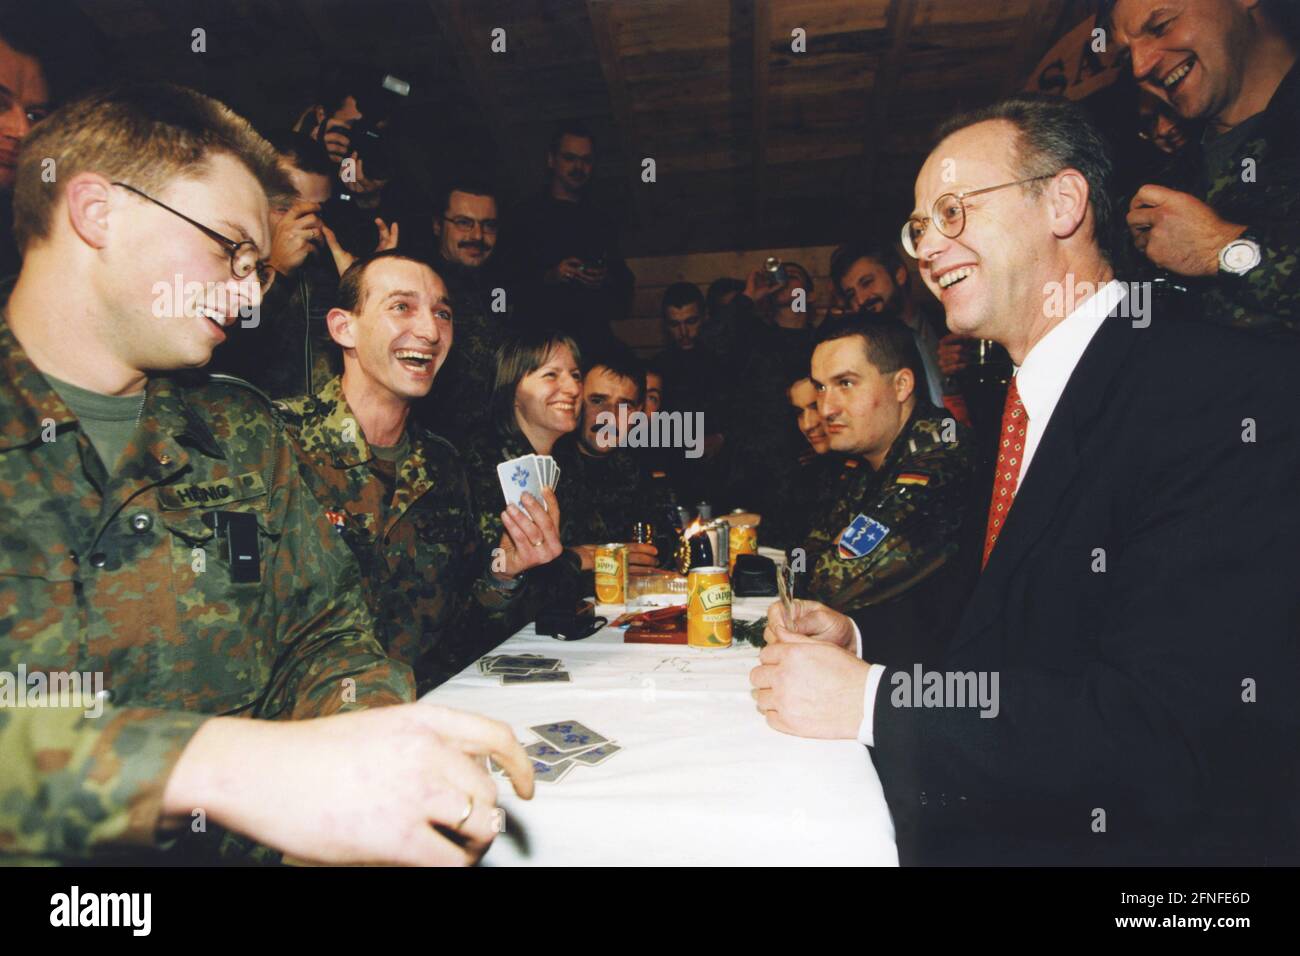 This photograph shows Federal Defence Minister Rudolf Scharping playing cards with Bundeswehr soldiers stationed there during his visit to the SFOR troops in Sarajevo (Sarajevo). The troops stationed here belonged to the SFOR (stabilsation Force), which had the task of peacekeeping and stabilization after the Bosnian War. [automated translation] Stock Photo